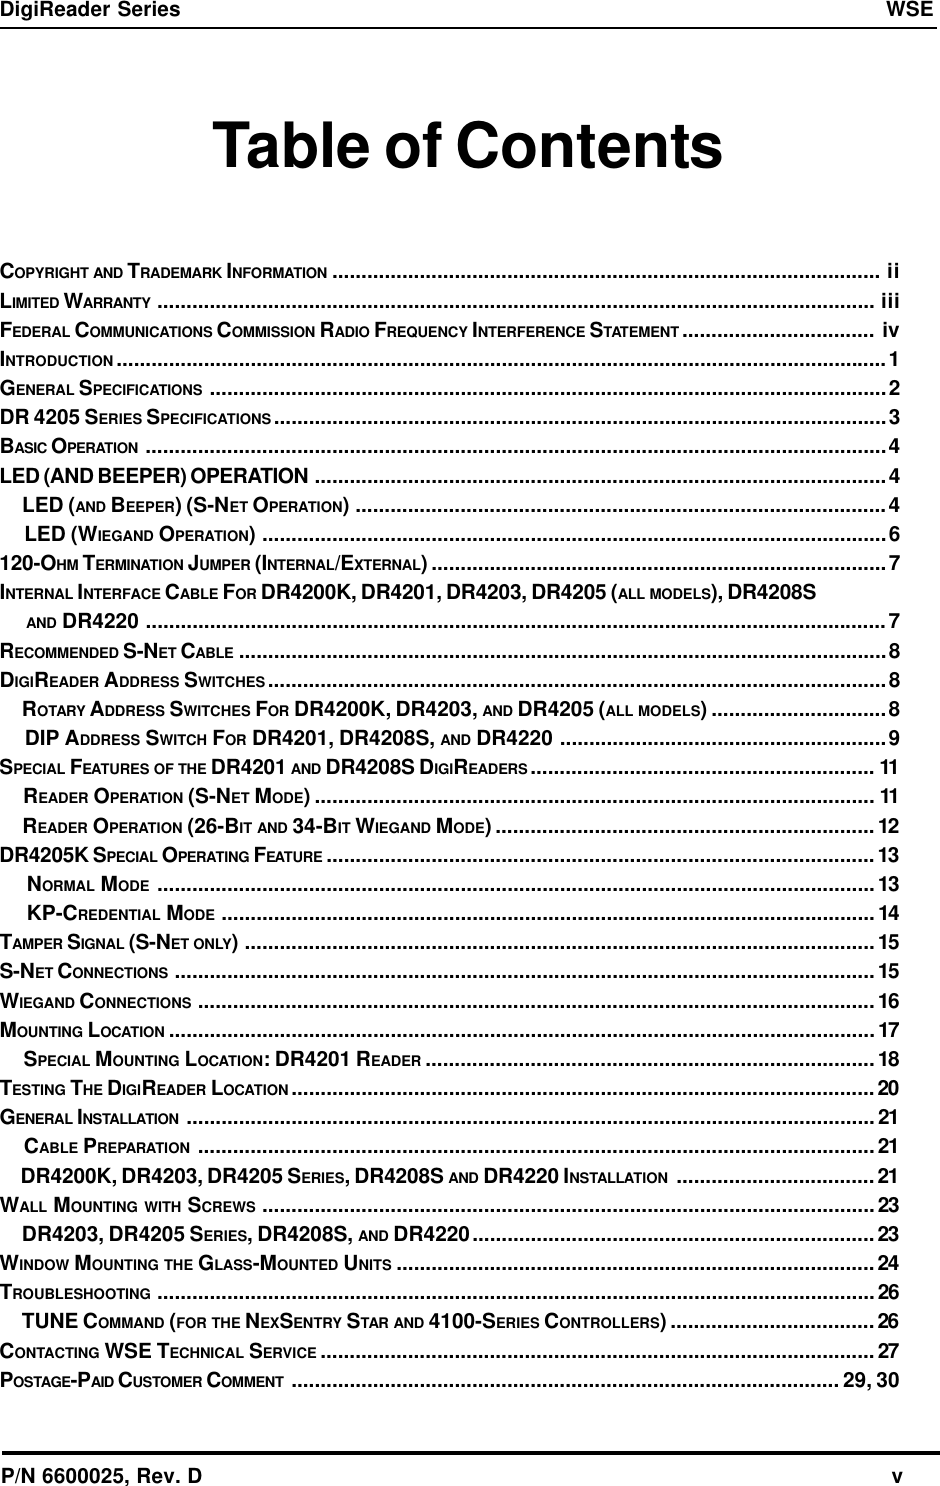 P/N 6600025, Rev. D                                                                                                              vDigiReader Series  WSETable of ContentsCOPYRIGHT AND TRADEMARK INFORMATION .............................................................................................. iiLIMITED WARRANTY ........................................................................................................................... iiiFEDERAL COMMUNICATIONS COMMISSION RADIO FREQUENCY INTERFERENCE STATEMENT ................................. ivINTRODUCTION ....................................................................................................................................1GENERAL SPECIFICATIONS ....................................................................................................................2DR 4205 SERIES SPECIFICATIONS .........................................................................................................3BASIC OPERATION ...............................................................................................................................4LED (AND BEEPER) OPERATION ..................................................................................................4     LED (AND BEEPER) (S-NET OPERATION) ...........................................................................................4     LED (WIEGAND OPERATION) ...........................................................................................................6120-OHM TERMINATION JUMPER (INTERNAL/EXTERNAL) ..............................................................................7INTERNAL INTERFACE CABLE FOR DR4200K, DR4201, DR4203, DR4205 (ALL MODELS), DR4208S     AND DR4220 ...............................................................................................................................7RECOMMENDED S-NET CABLE ...............................................................................................................8DIGIREADER ADDRESS SWITCHES ..........................................................................................................8     ROTARY ADDRESS SWITCHES FOR DR4200K, DR4203, AND DR4205 (ALL MODELS) ..............................8     DIP ADDRESS SWITCH FOR DR4201, DR4208S, AND DR4220 ........................................................9SPECIAL FEATURES OF THE DR4201 AND DR4208S DIGIREADERS ........................................................... 11     READER OPERATION (S-NET MODE) ................................................................................................ 11     READER OPERATION (26-BIT AND 34-BIT WIEGAND MODE) .................................................................12DR4205K SPECIAL OPERATING FEATURE ..............................................................................................13     NORMAL MODE ...........................................................................................................................13     KP-CREDENTIAL MODE ................................................................................................................14TAMPER SIGNAL (S-NET ONLY) ............................................................................................................15S-NET CONNECTIONS ........................................................................................................................15WIEGAND CONNECTIONS ....................................................................................................................16MOUNTING LOCATION .........................................................................................................................17     SPECIAL MOUNTING LOCATION: DR4201 READER .............................................................................18TESTING THE DIGIREADER LOCATION ....................................................................................................20GENERAL INSTALLATION ......................................................................................................................21     CABLE PREPARATION ....................................................................................................................21     DR4200K, DR4203, DR4205 SERIES, DR4208S AND DR4220 INSTALLATION ..................................21WALL MOUNTING WITH SCREWS .........................................................................................................23     DR4203, DR4205 SERIES, DR4208S, AND DR4220.....................................................................23WINDOW MOUNTING THE GLASS-MOUNTED UNITS .................................................................................. 24TROUBLESHOOTING ...........................................................................................................................26     TUNE COMMAND (FOR THE NEXSENTRY STAR AND 4100-SERIES CONTROLLERS) ...................................26CONTACTING WSE TECHNICAL SERVICE ...............................................................................................27POSTAGE-PAID CUSTOMER COMMENT .............................................................................................. 29, 30